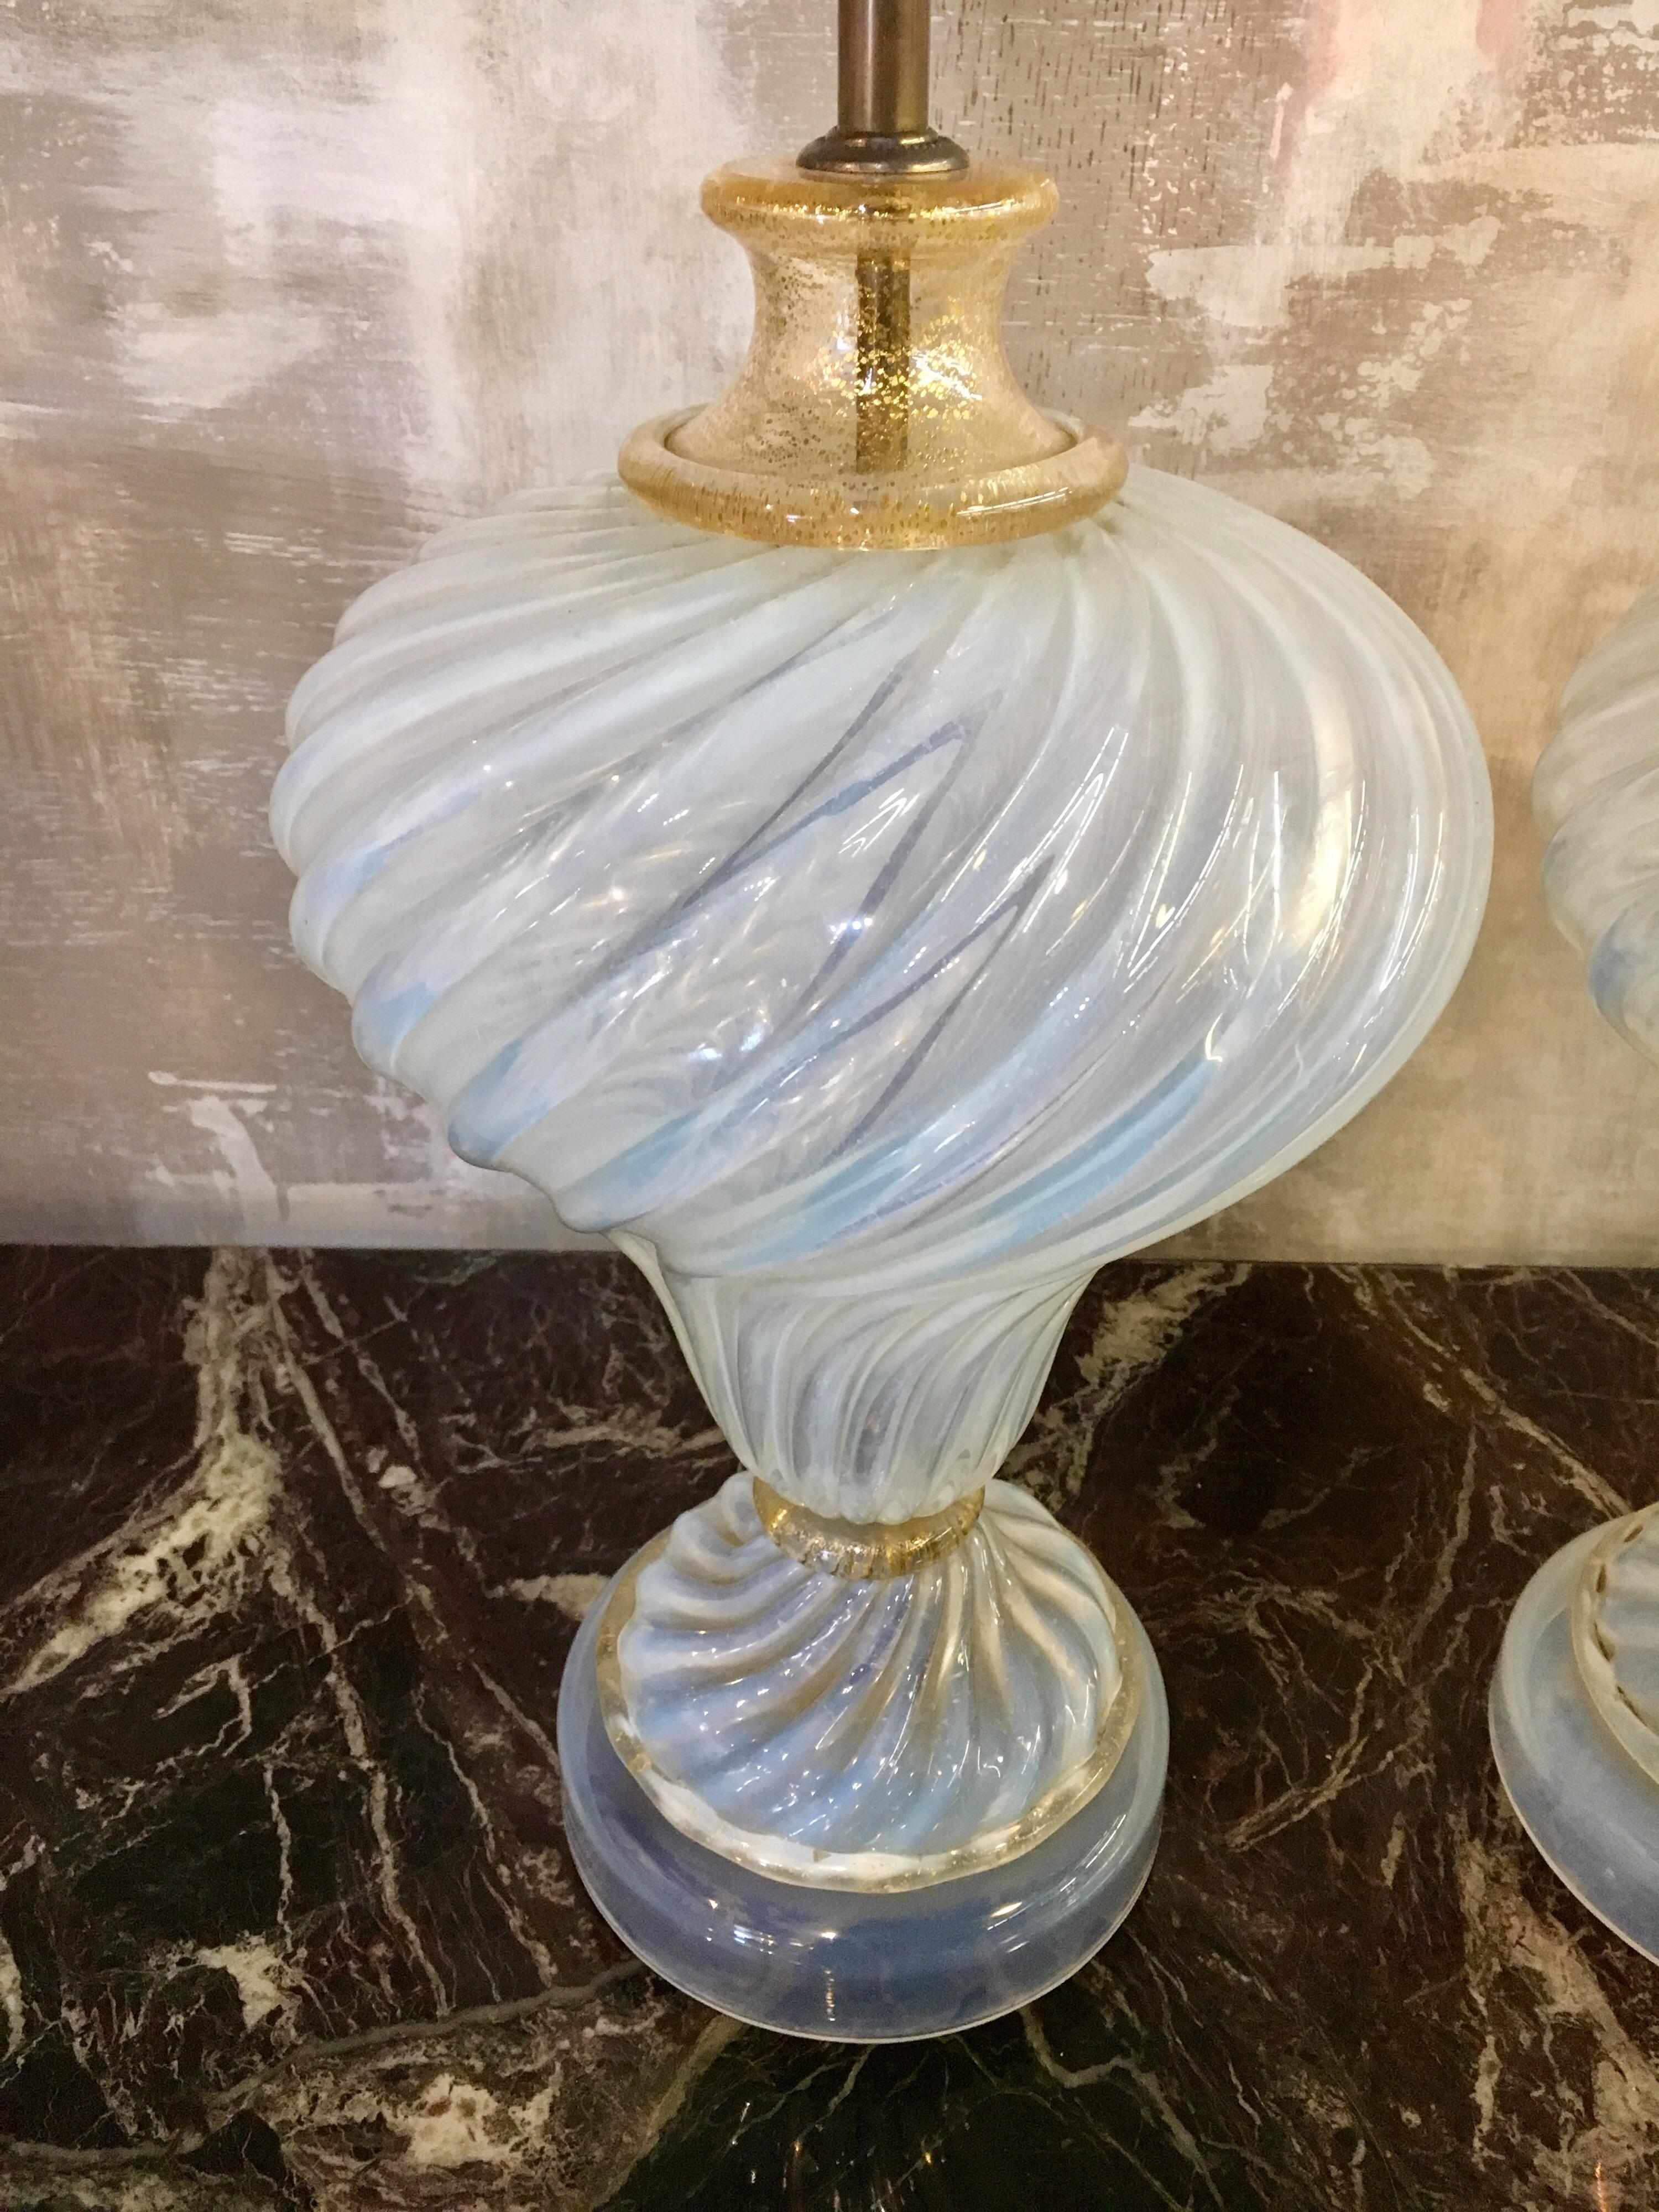 Elegant matching pair of Murano Glass swirl table lamps done in a subtle turquoise blue and 24 carat gold flecks. As unusual as they are beautiful!
Wired for US and in perfect working order.